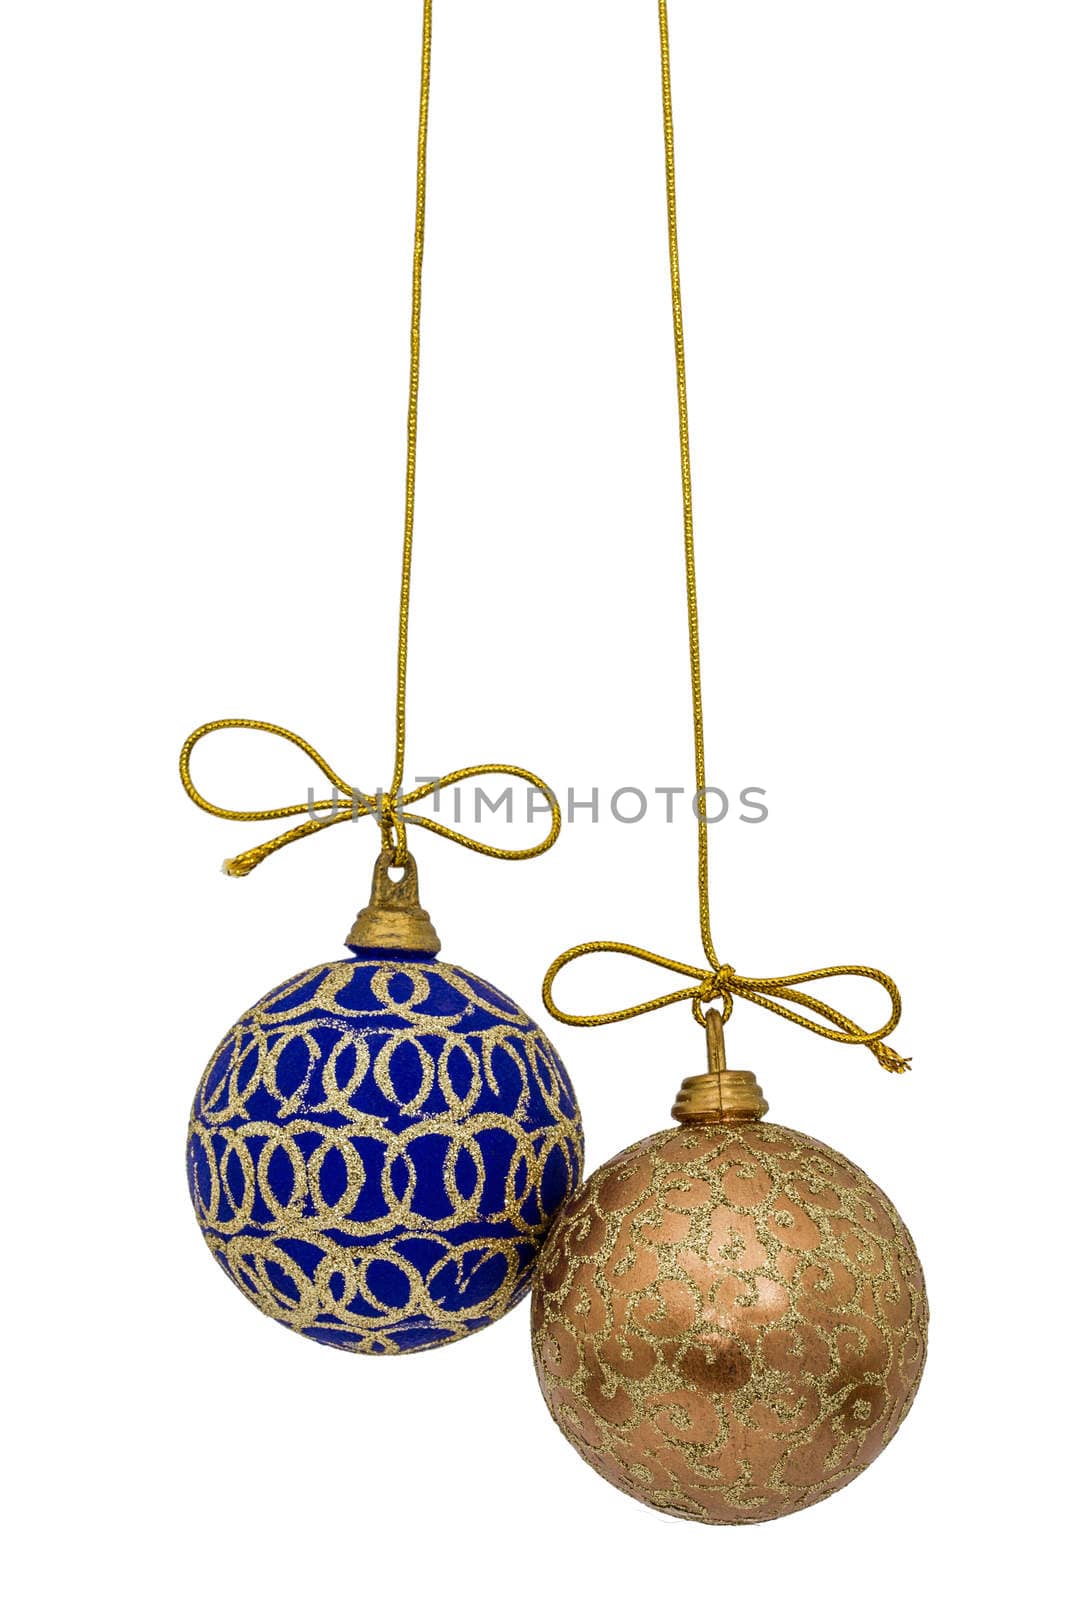 Beautiful Christmas balls are suspended on a gold thread, isolated on white background